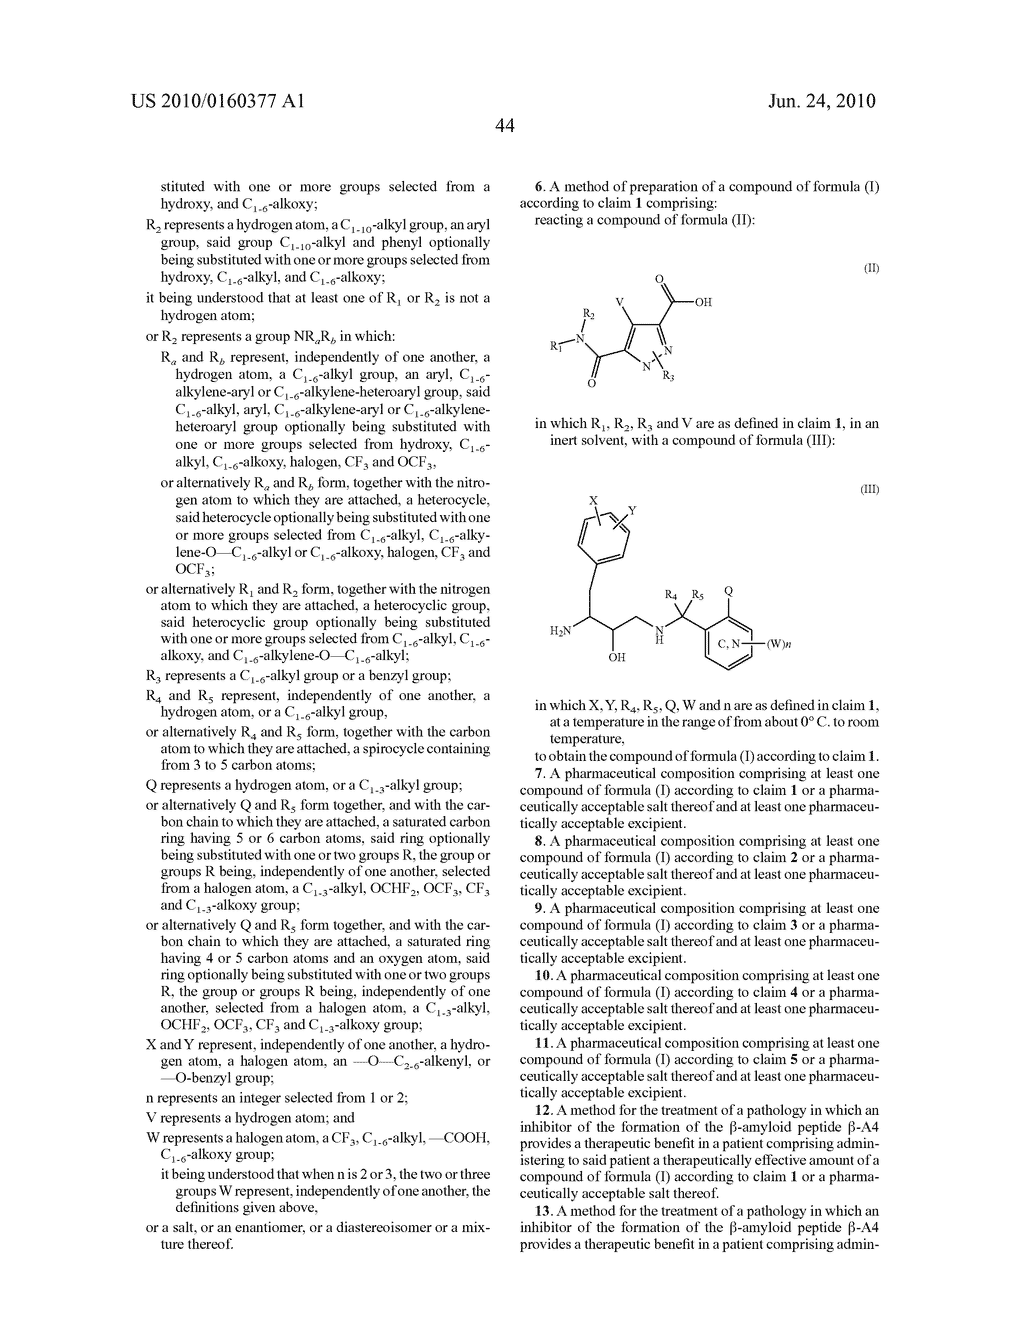 DERIVATIVES OF PYRAZOLE 3,5-CARBOXYLATES, THEIR PREPARATION AND THEIR APPLICATION IN THERAPEUTICS - diagram, schematic, and image 45